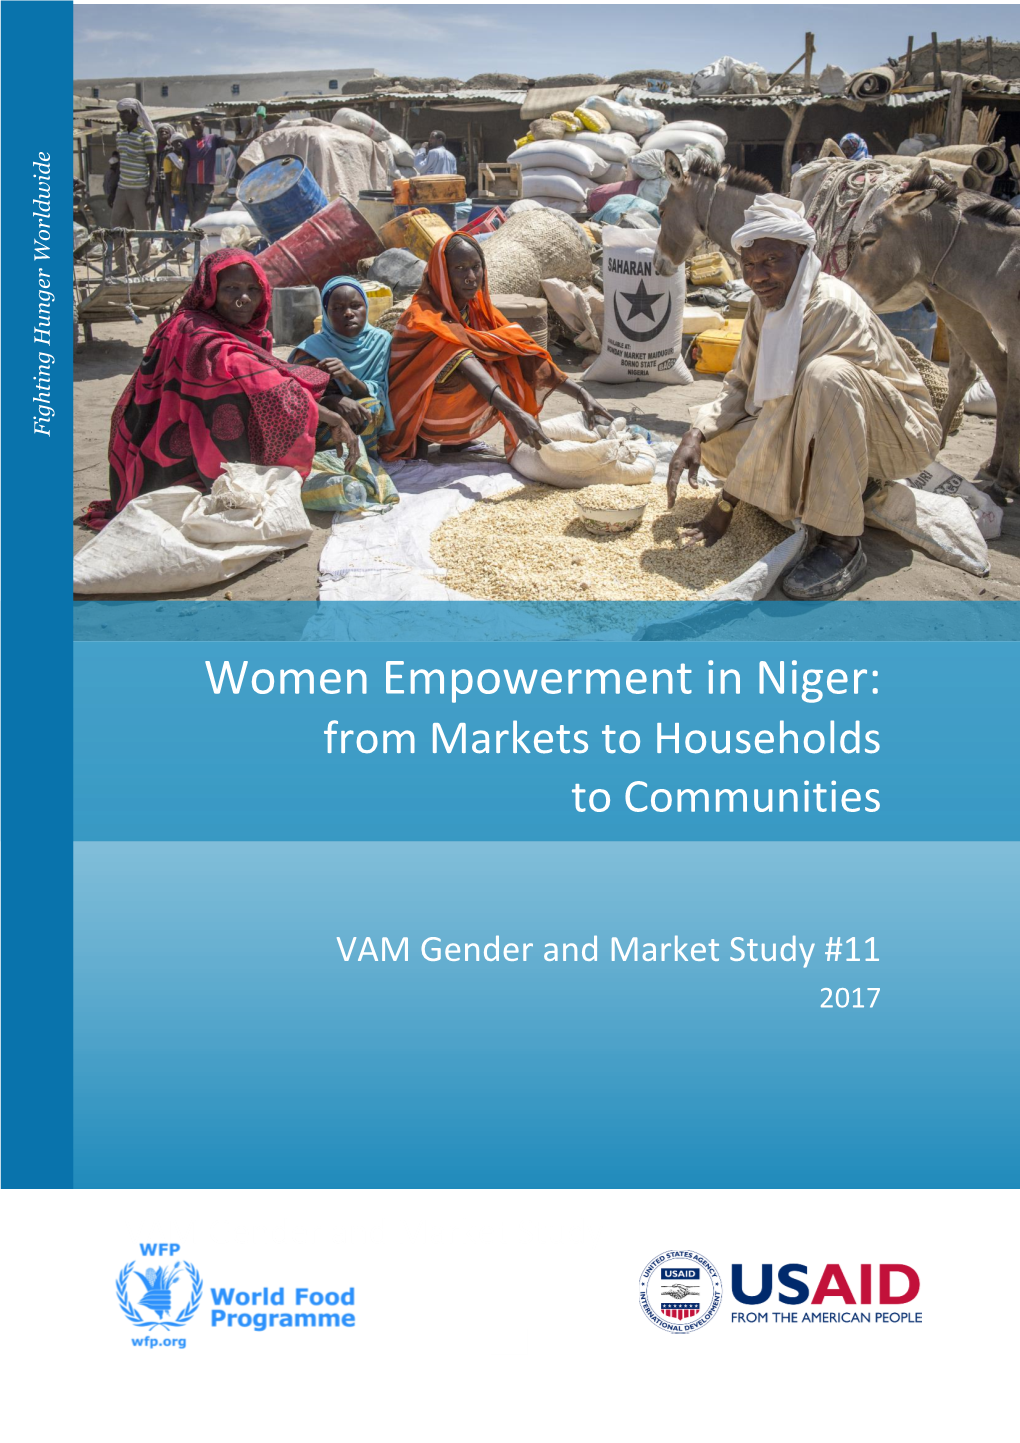 Women Empowerment in Niger: from Markets to Households to Communities